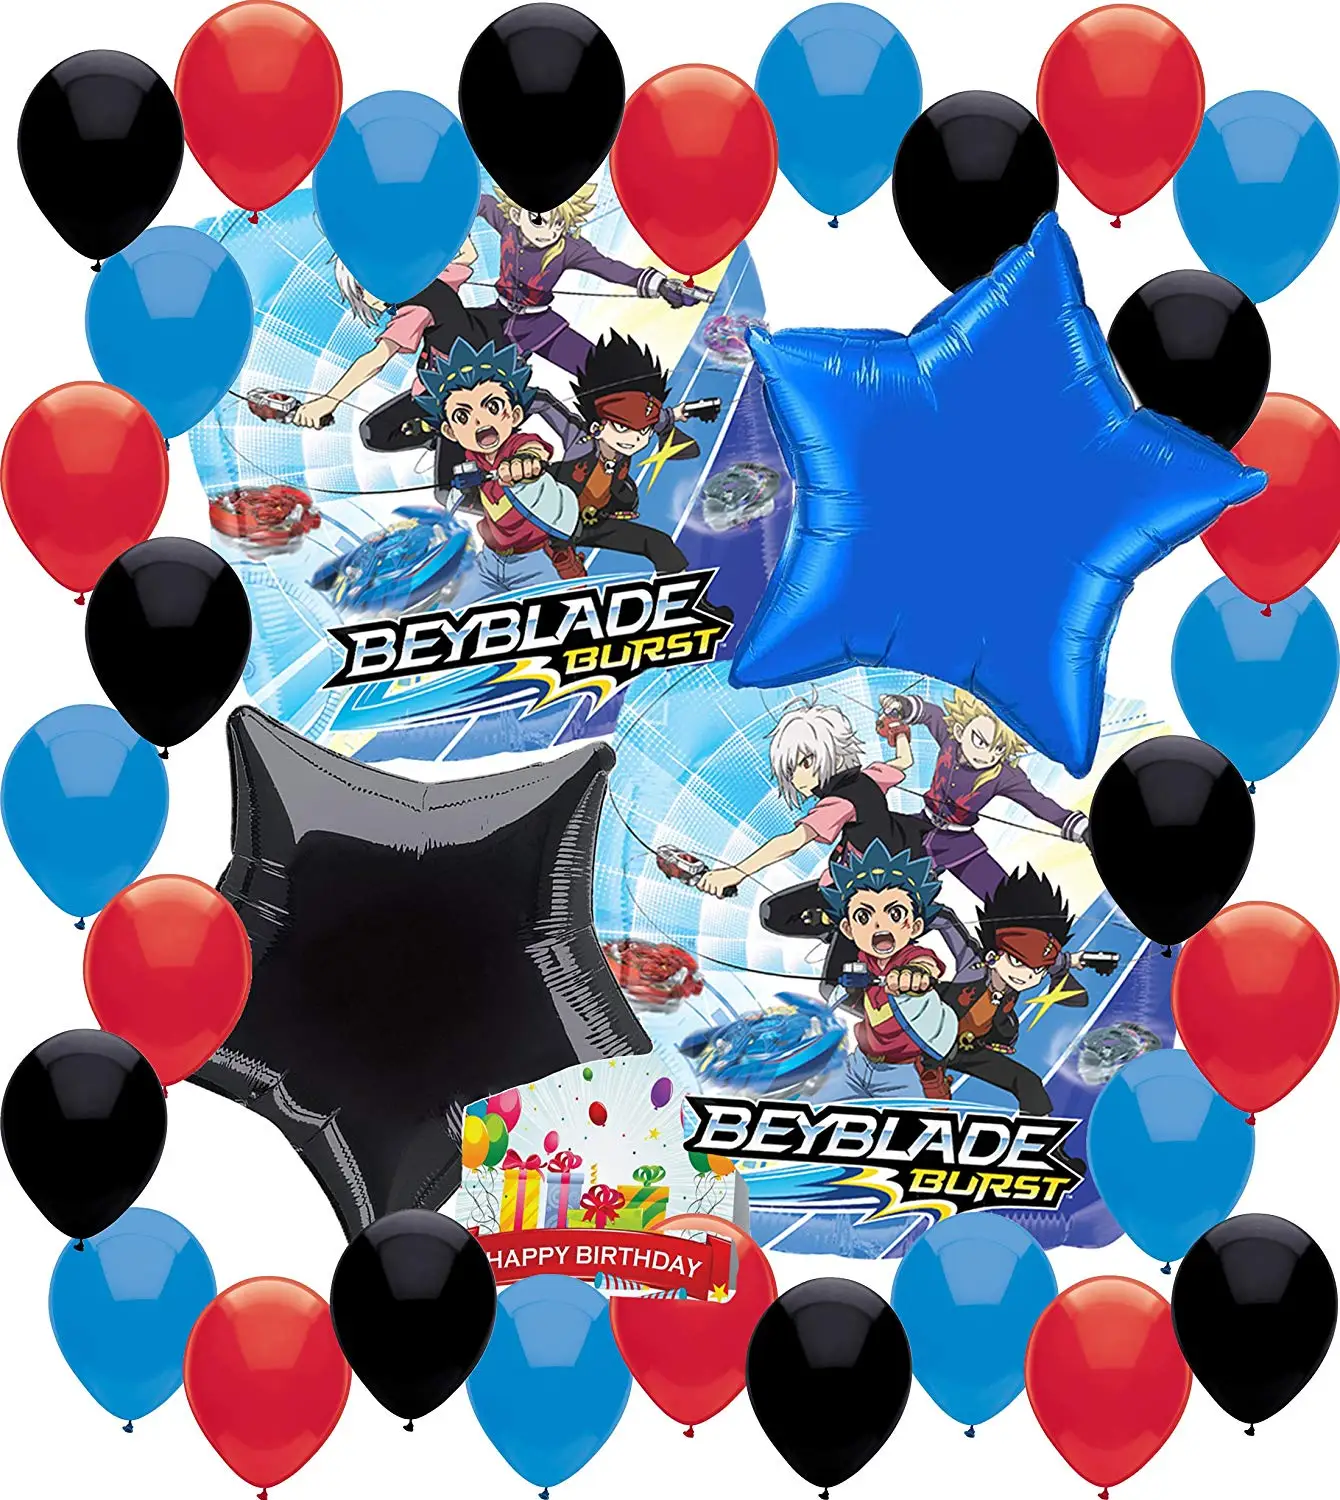 Buy Beyblade Burst Birthday Party Supplies Pack for 16 Guests Straws 